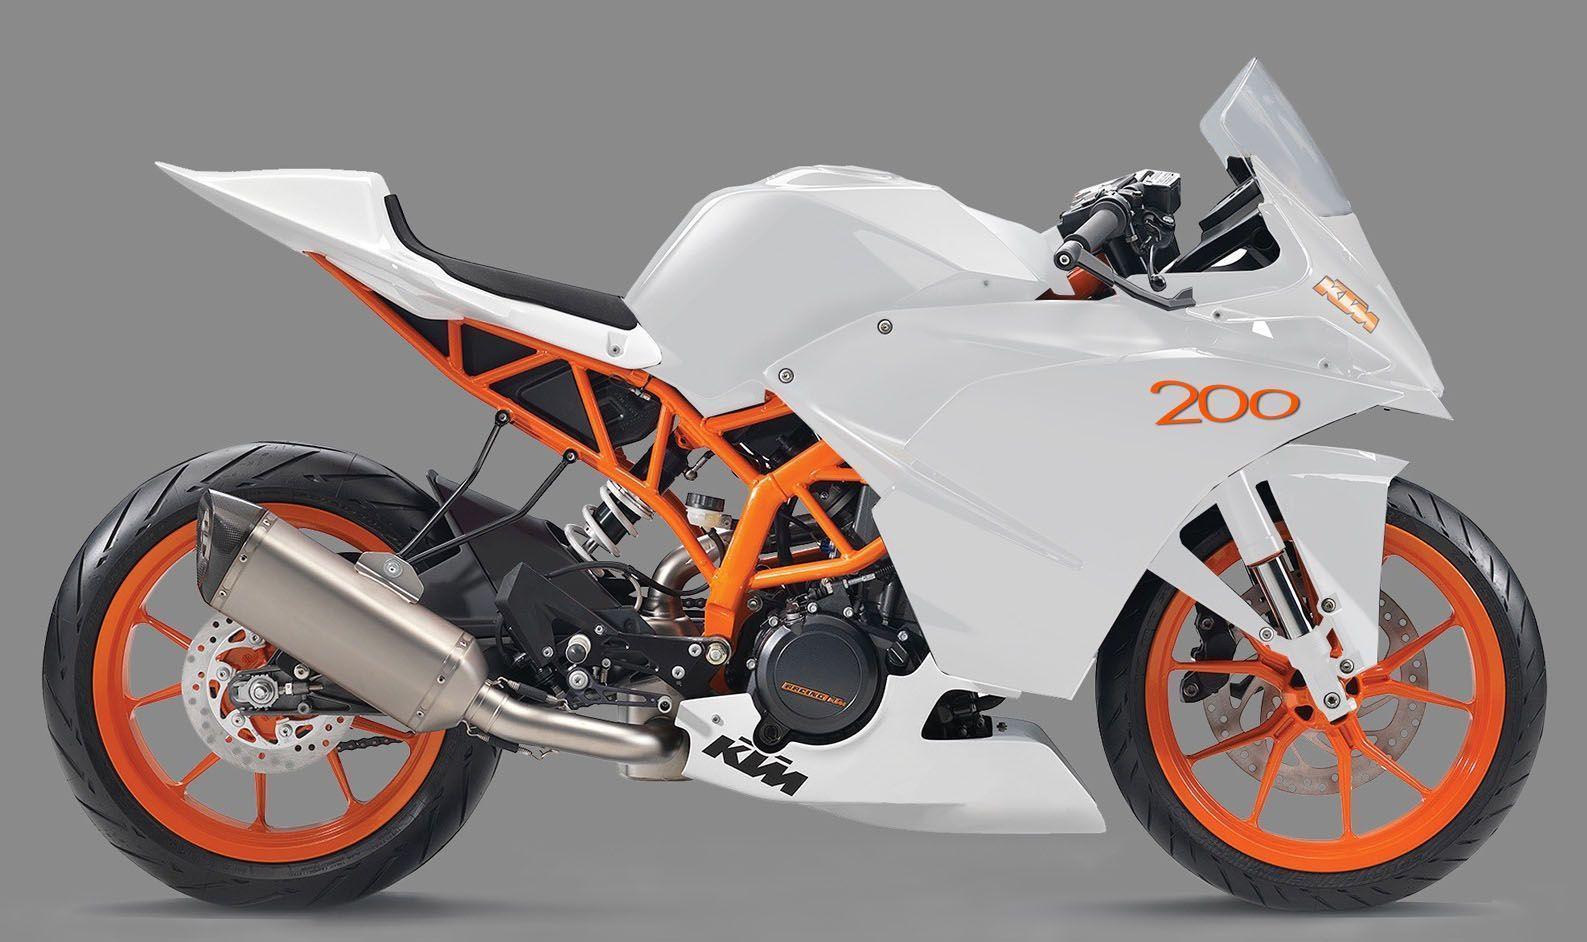 KTM set to launch RC 200 and 390